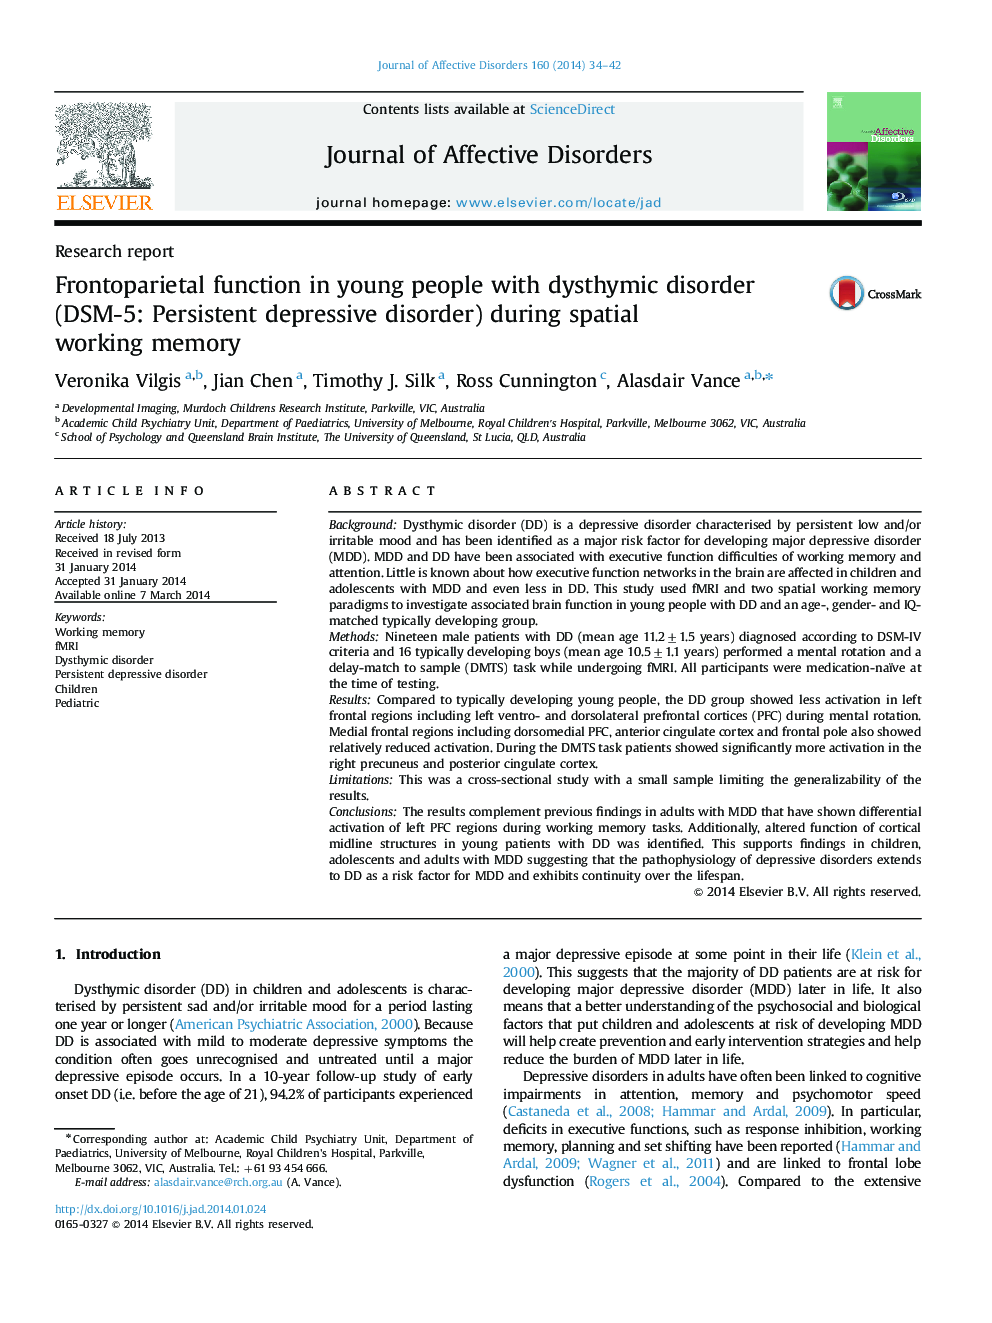 Frontoparietal function in young people with dysthymic disorder (DSM-5: Persistent depressive disorder) during spatial working memory